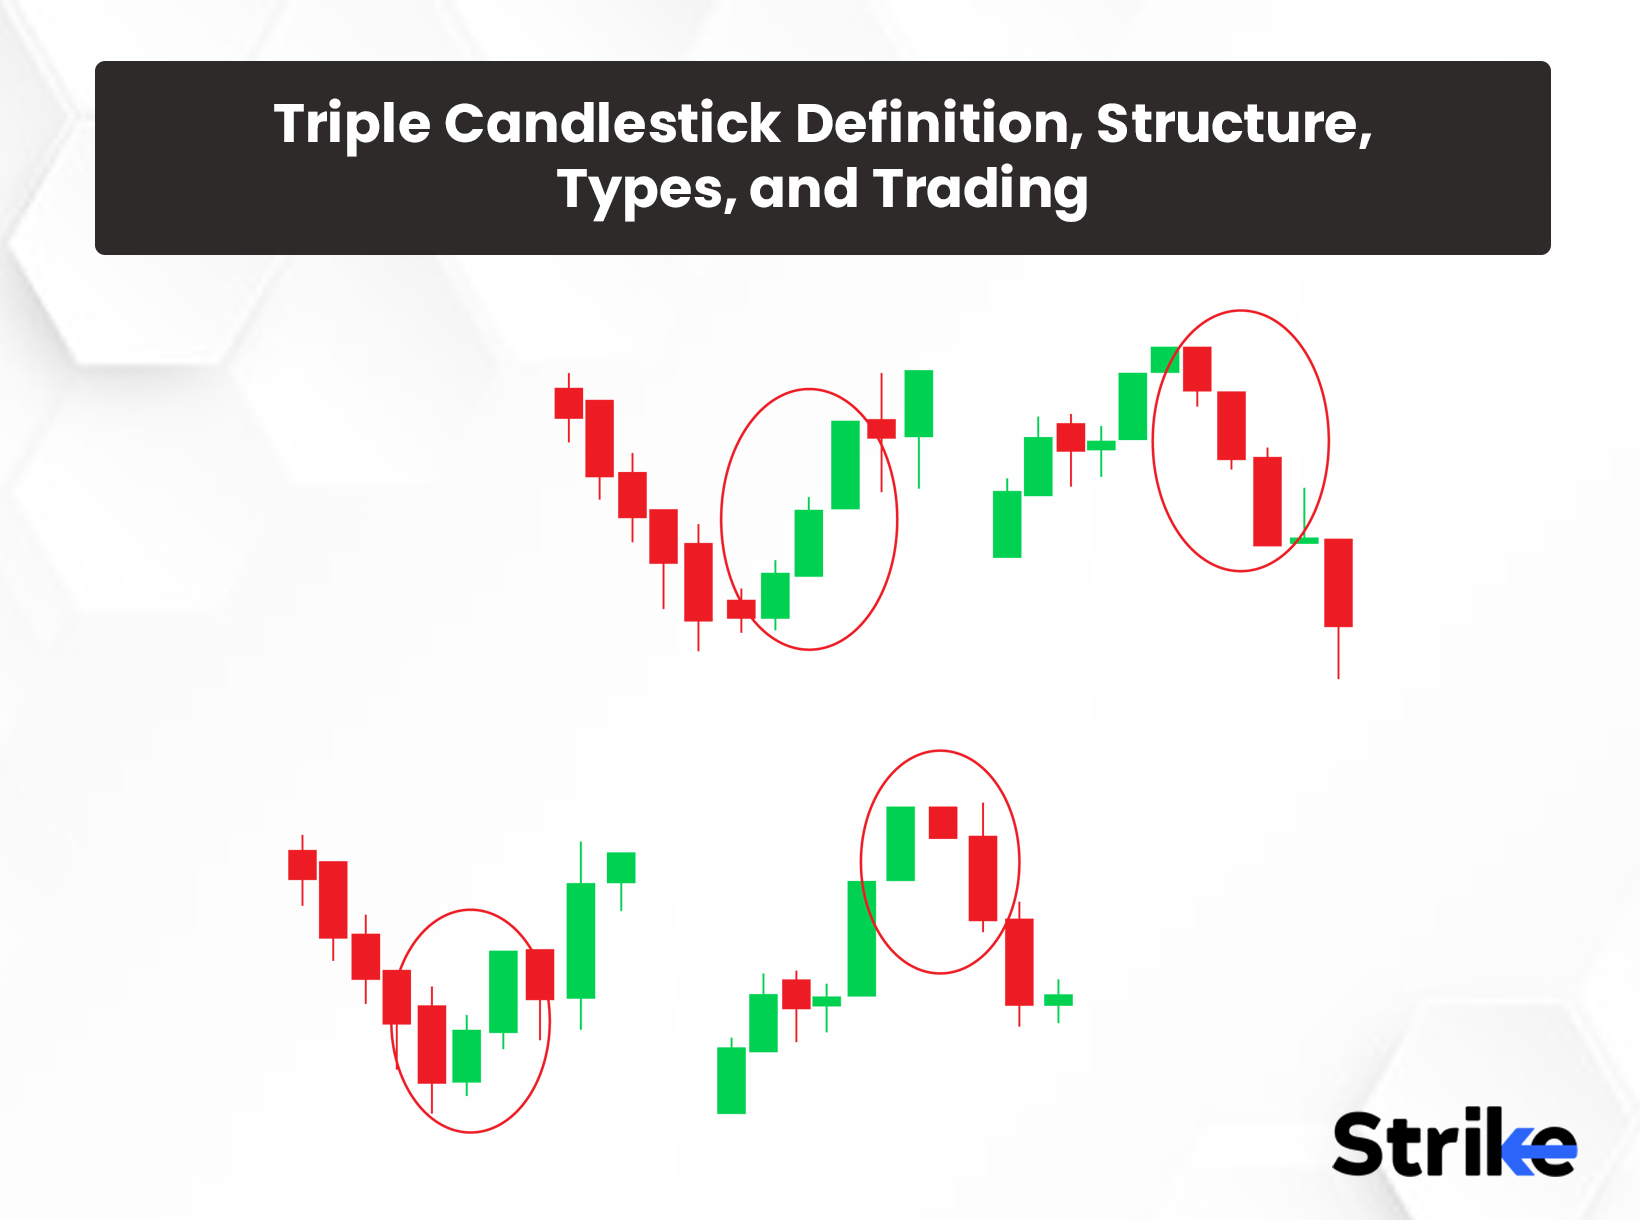 Triple Candlestick: Definition, Structure, Types, and Trading